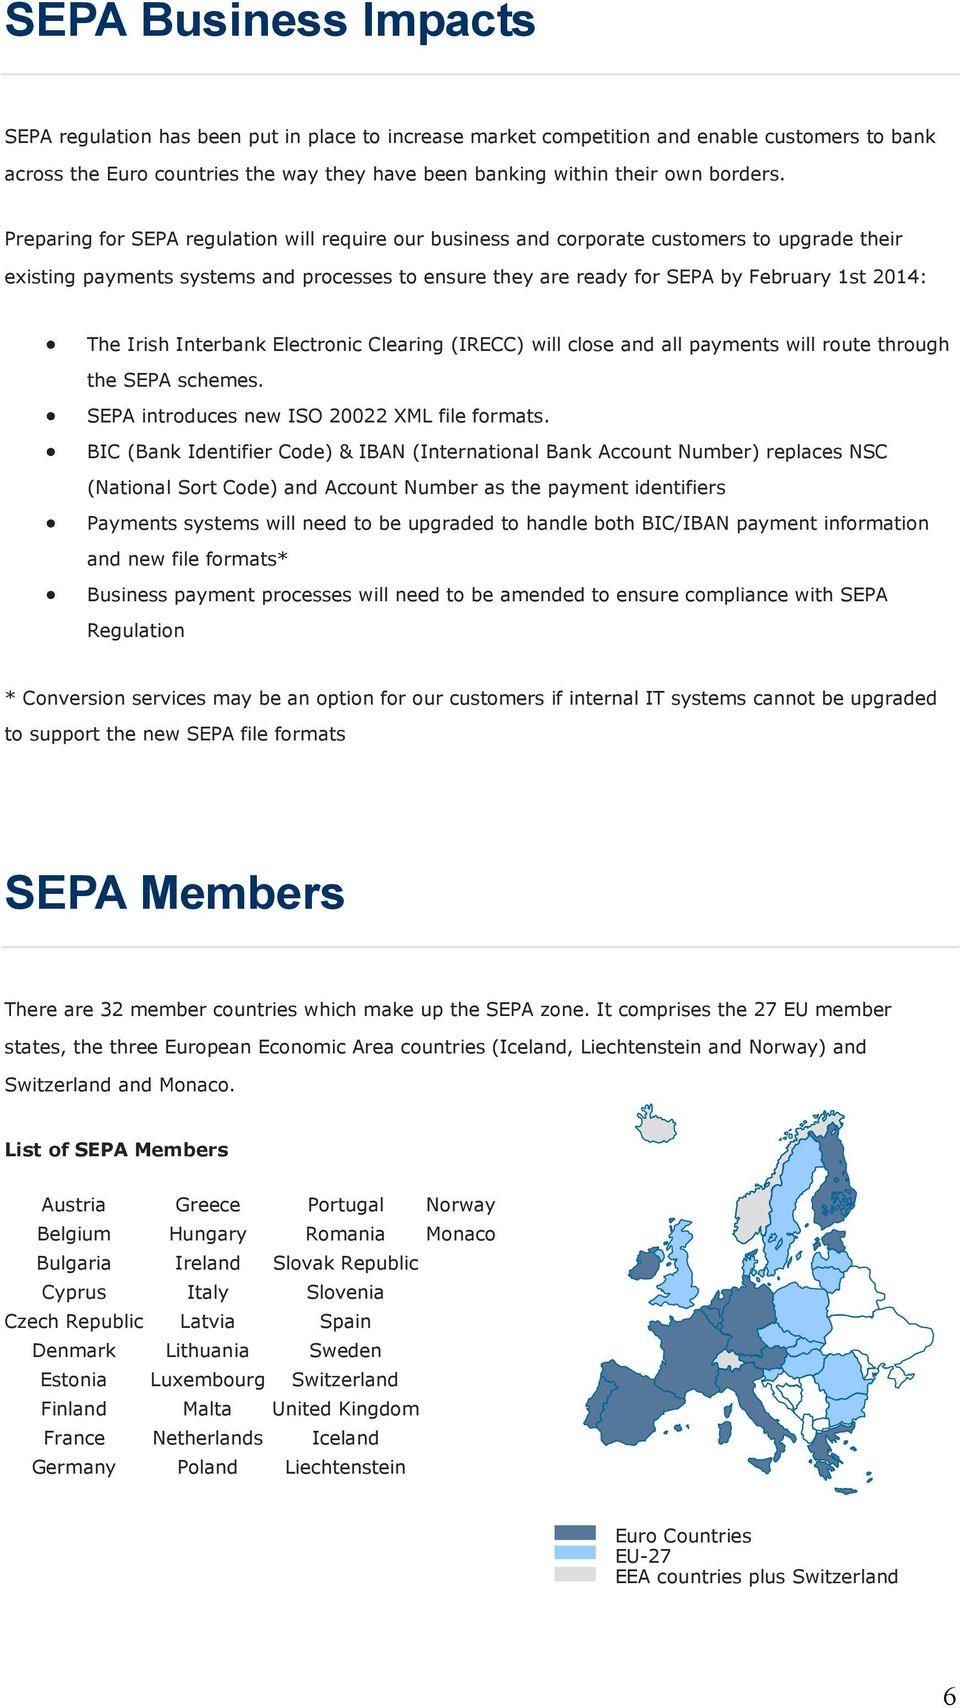 Preparing for SEPA regulation will require our business and corporate customers to upgrade their existing payments systems and processes to ensure they are ready for SEPA by February 1st 2014: The